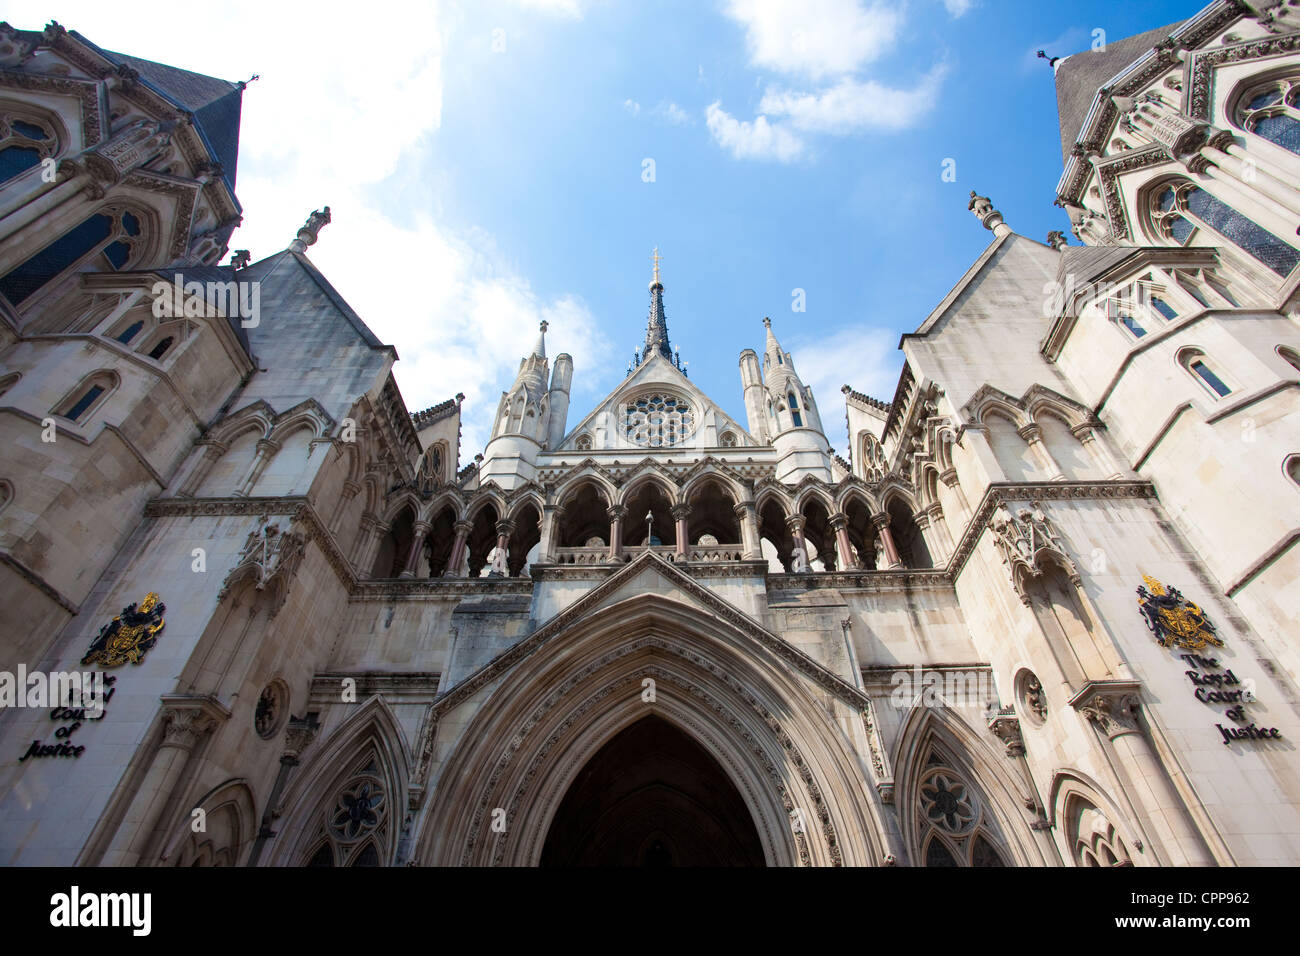 The Royal Courts of Justice, High Court, London, England, UK. Stock Photo